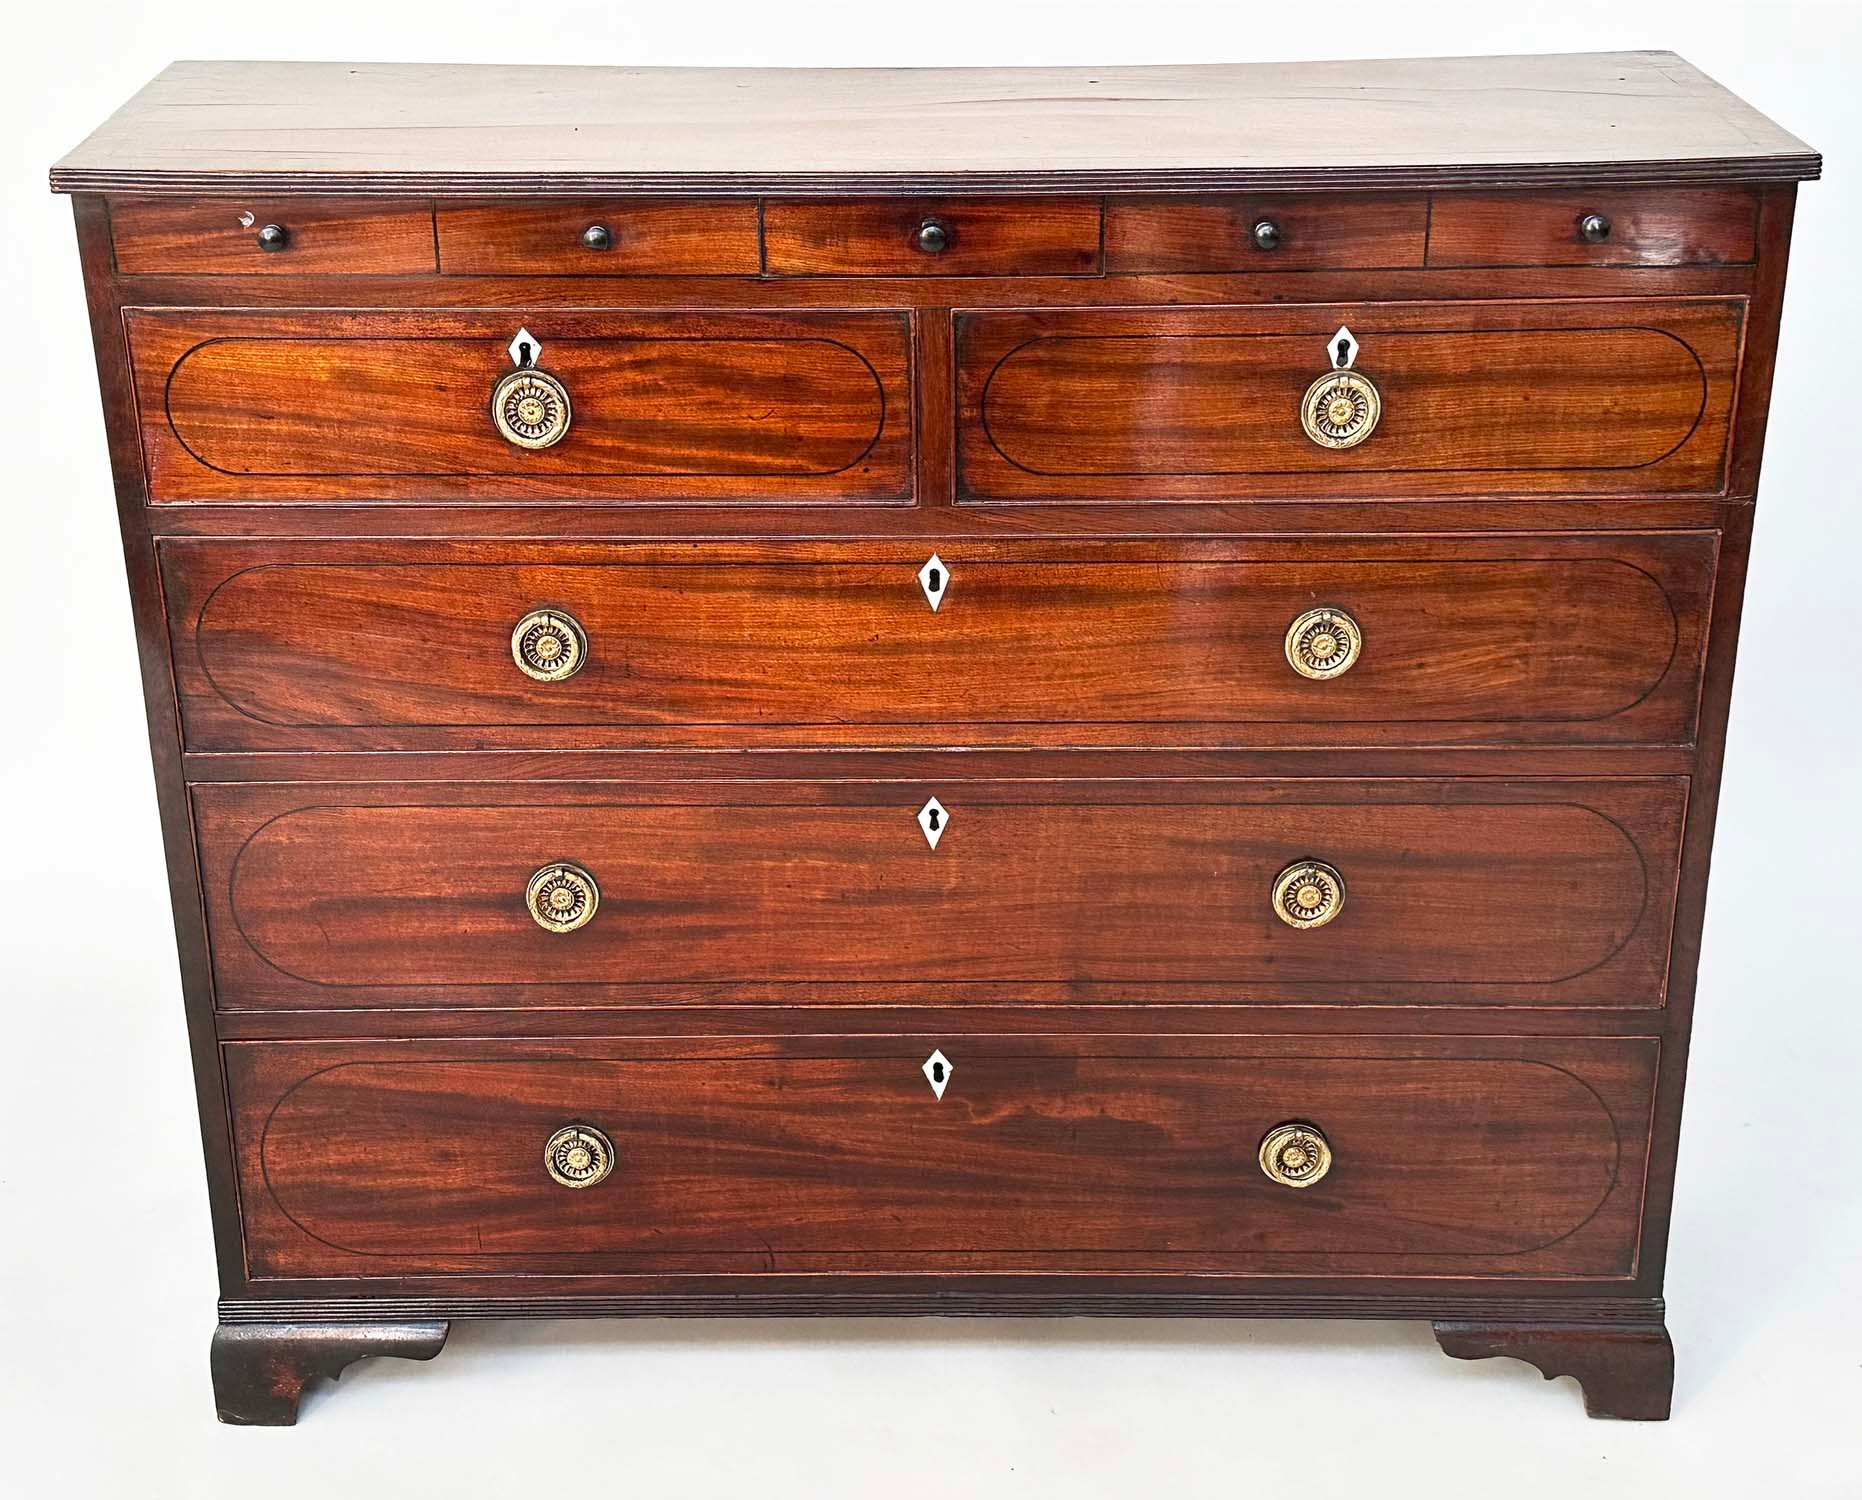 SCOTTISH HALL CHEST, early 19th century figured mahogany of adapted shallow proportions with real - Image 2 of 8